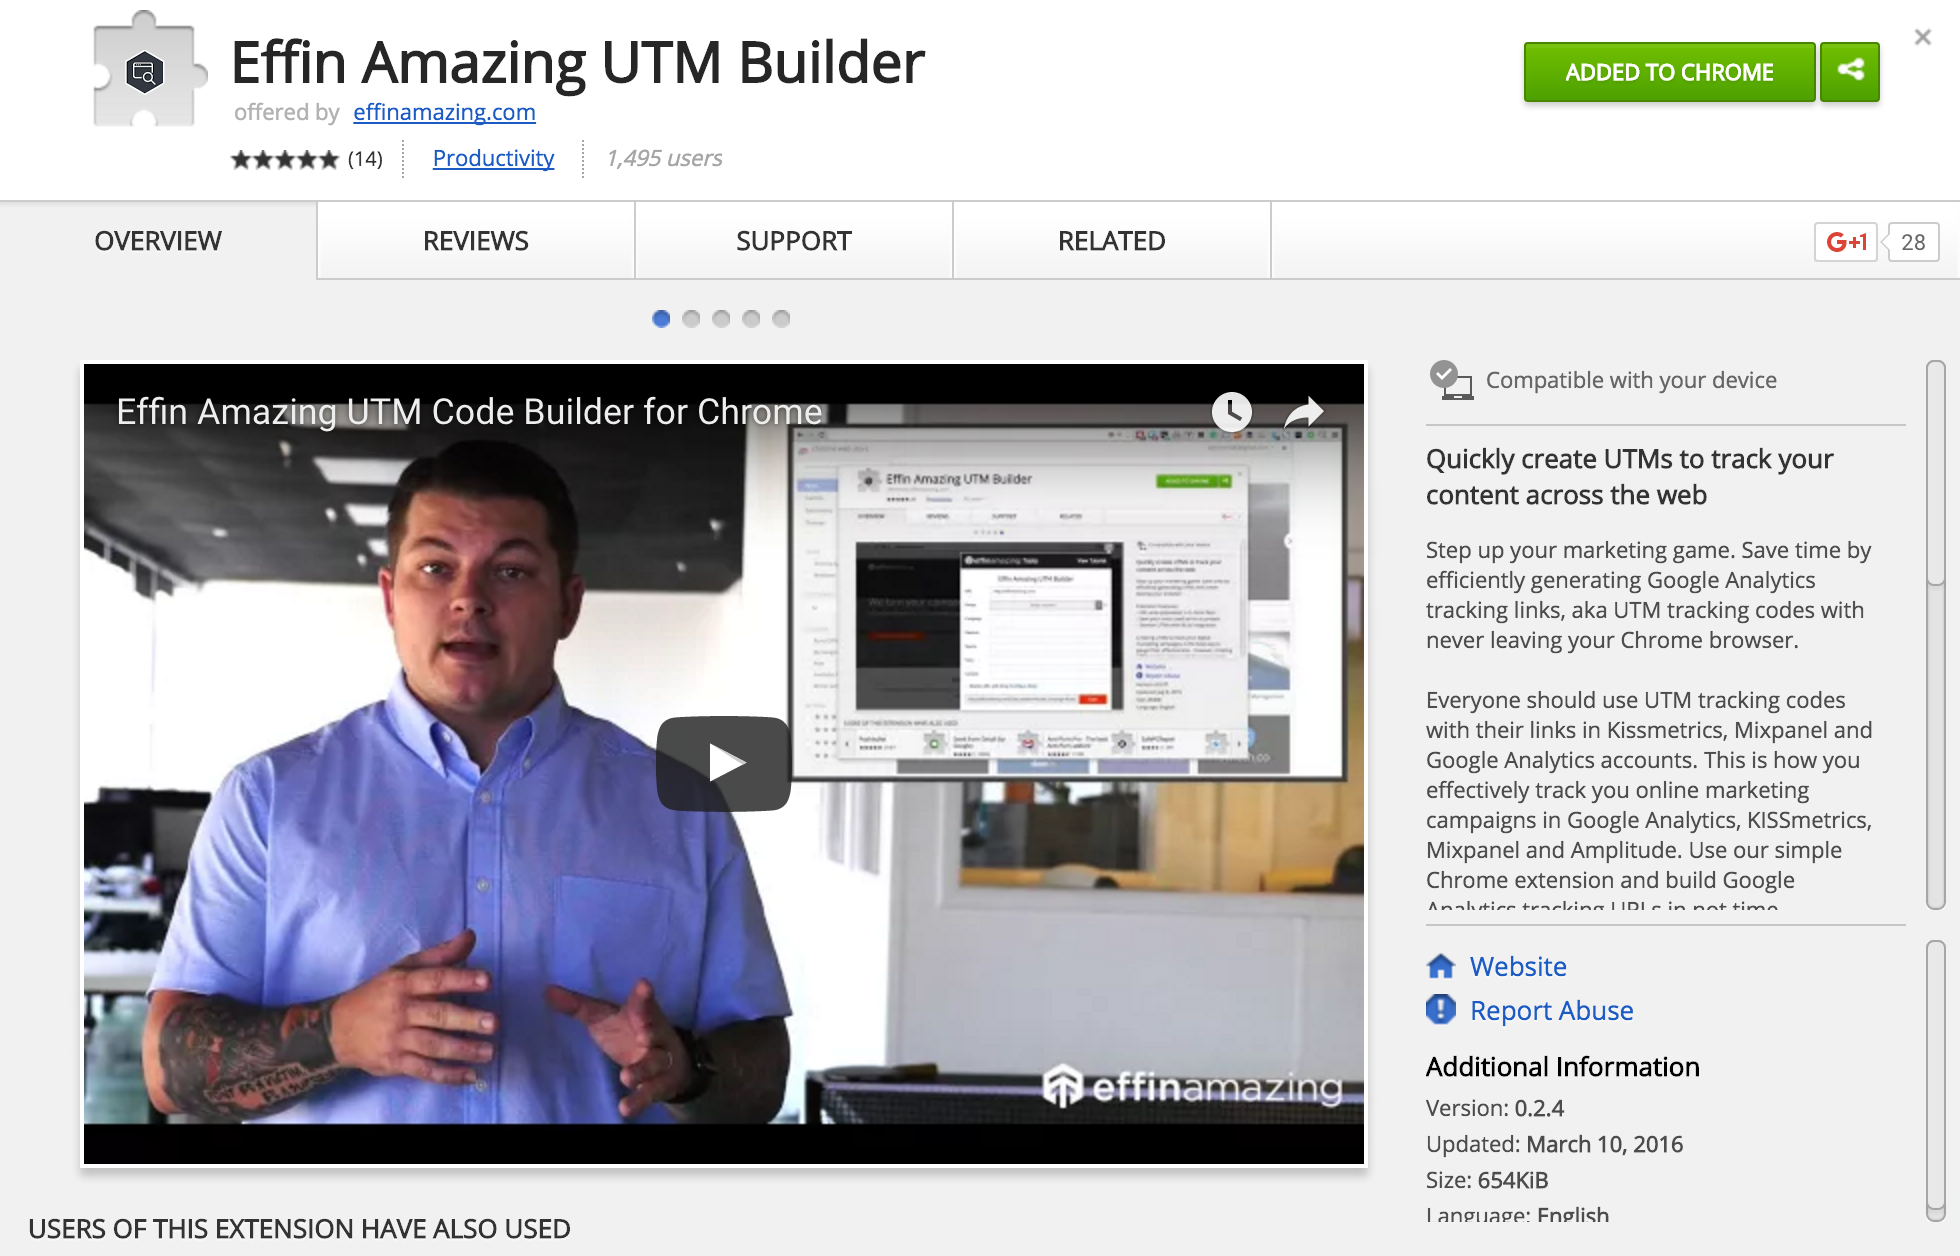 Just Launched: Effin Amazing UTM Tool, Introducing Google Sheets Integration for Team Collaboration